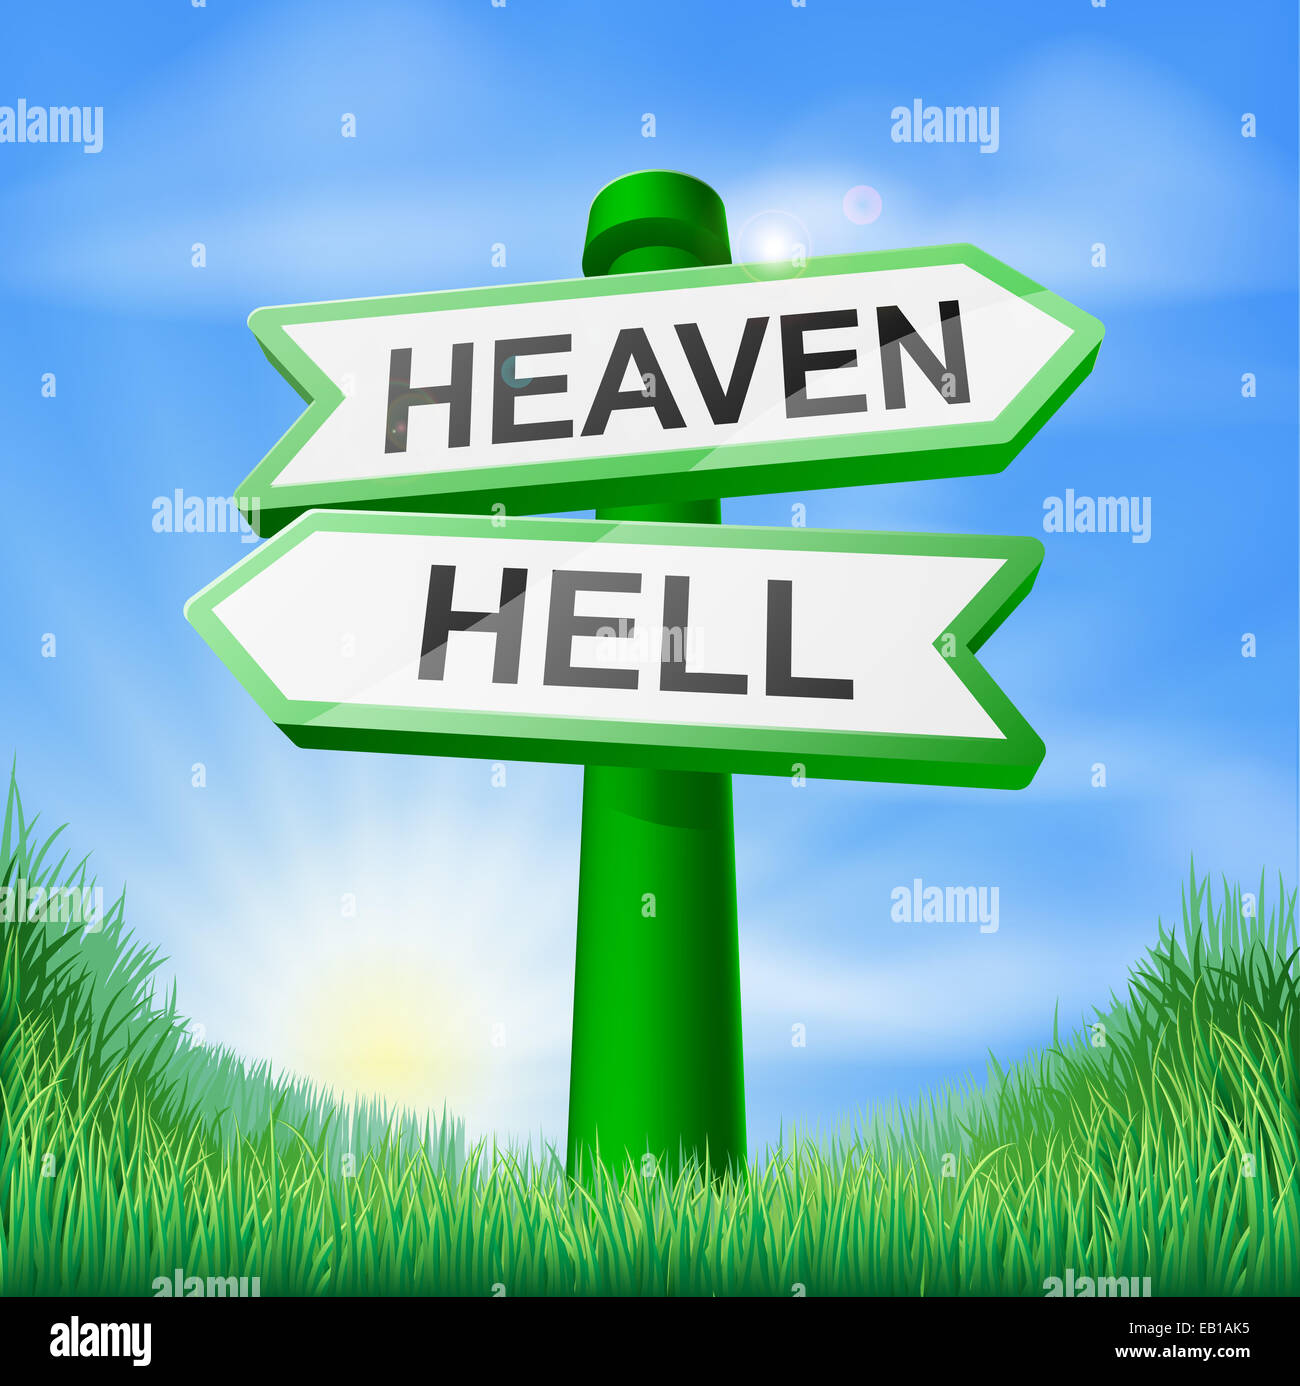 Heaven or Hell sign in a sunny green field of lush grass Stock Photo